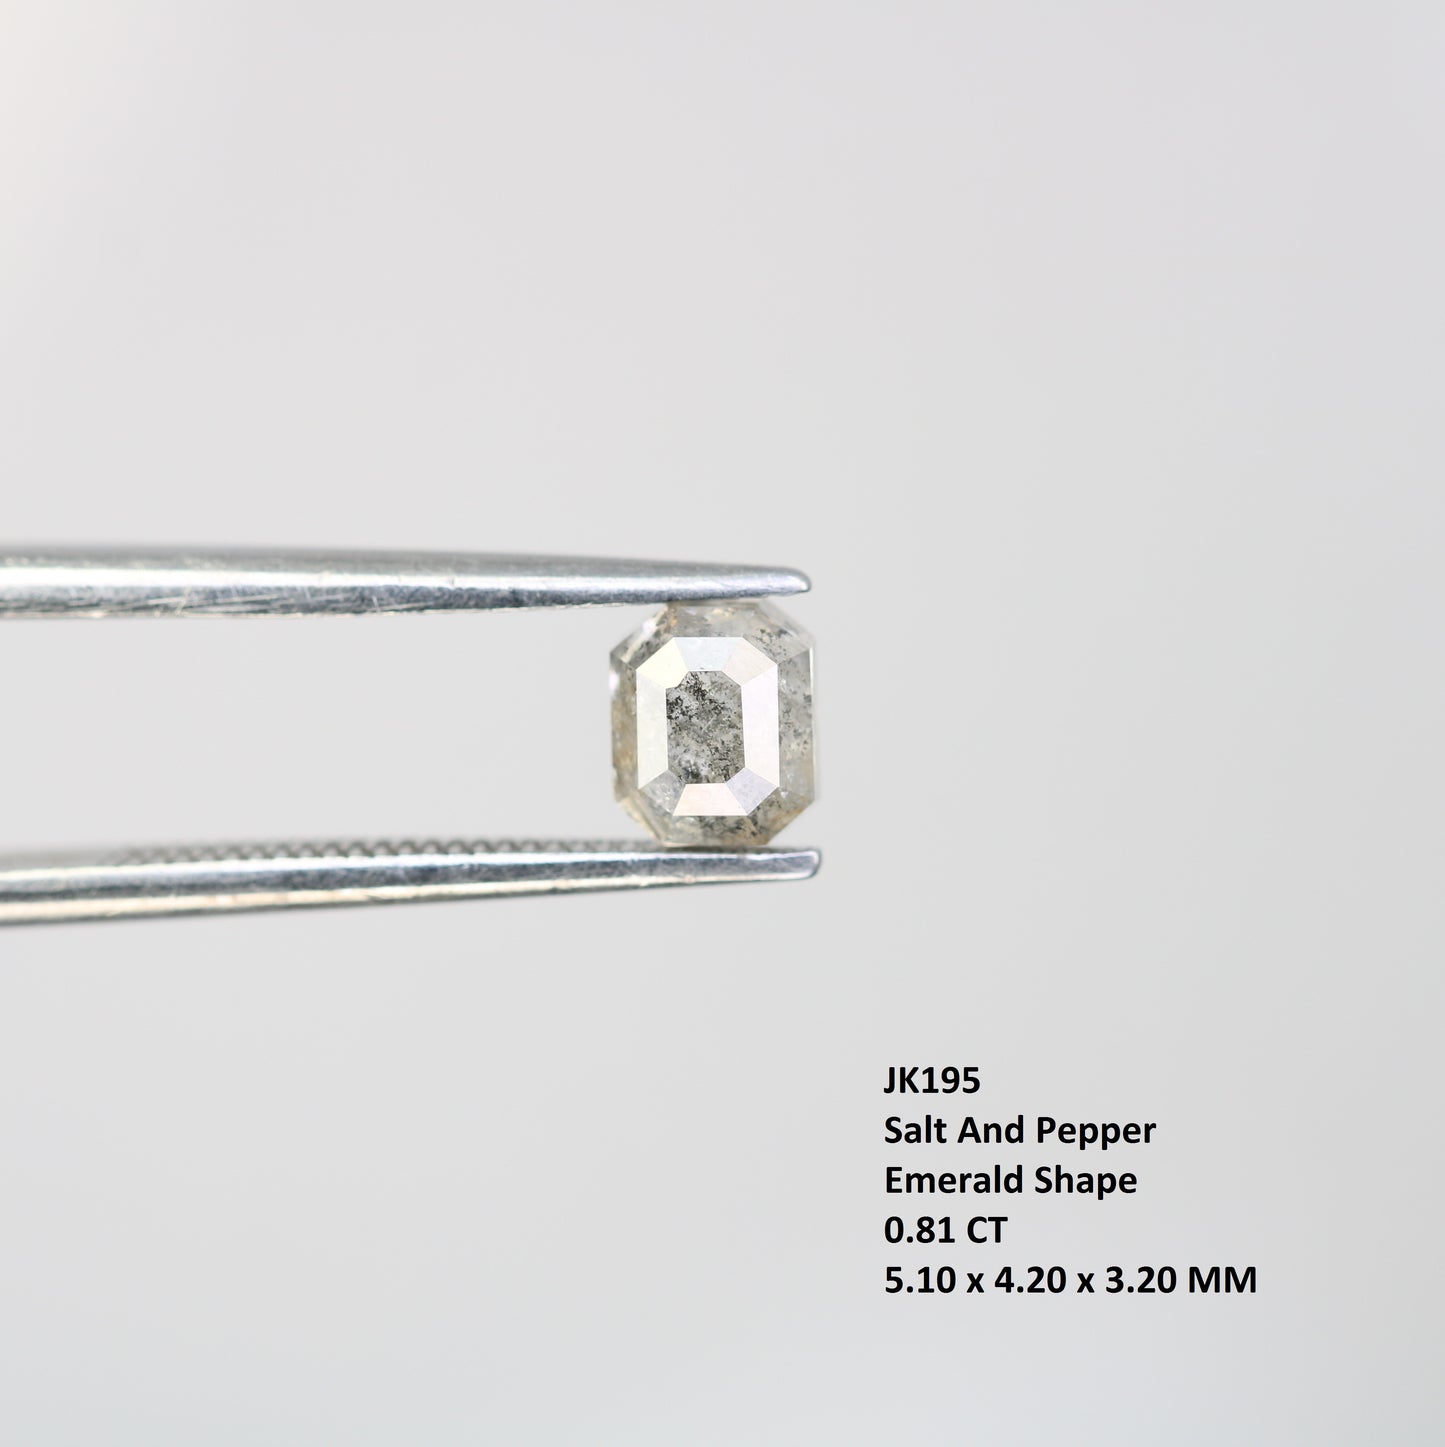 0.81 CT Emerald Cut Salt And Pepper Natural Diamond For Engagement Ring